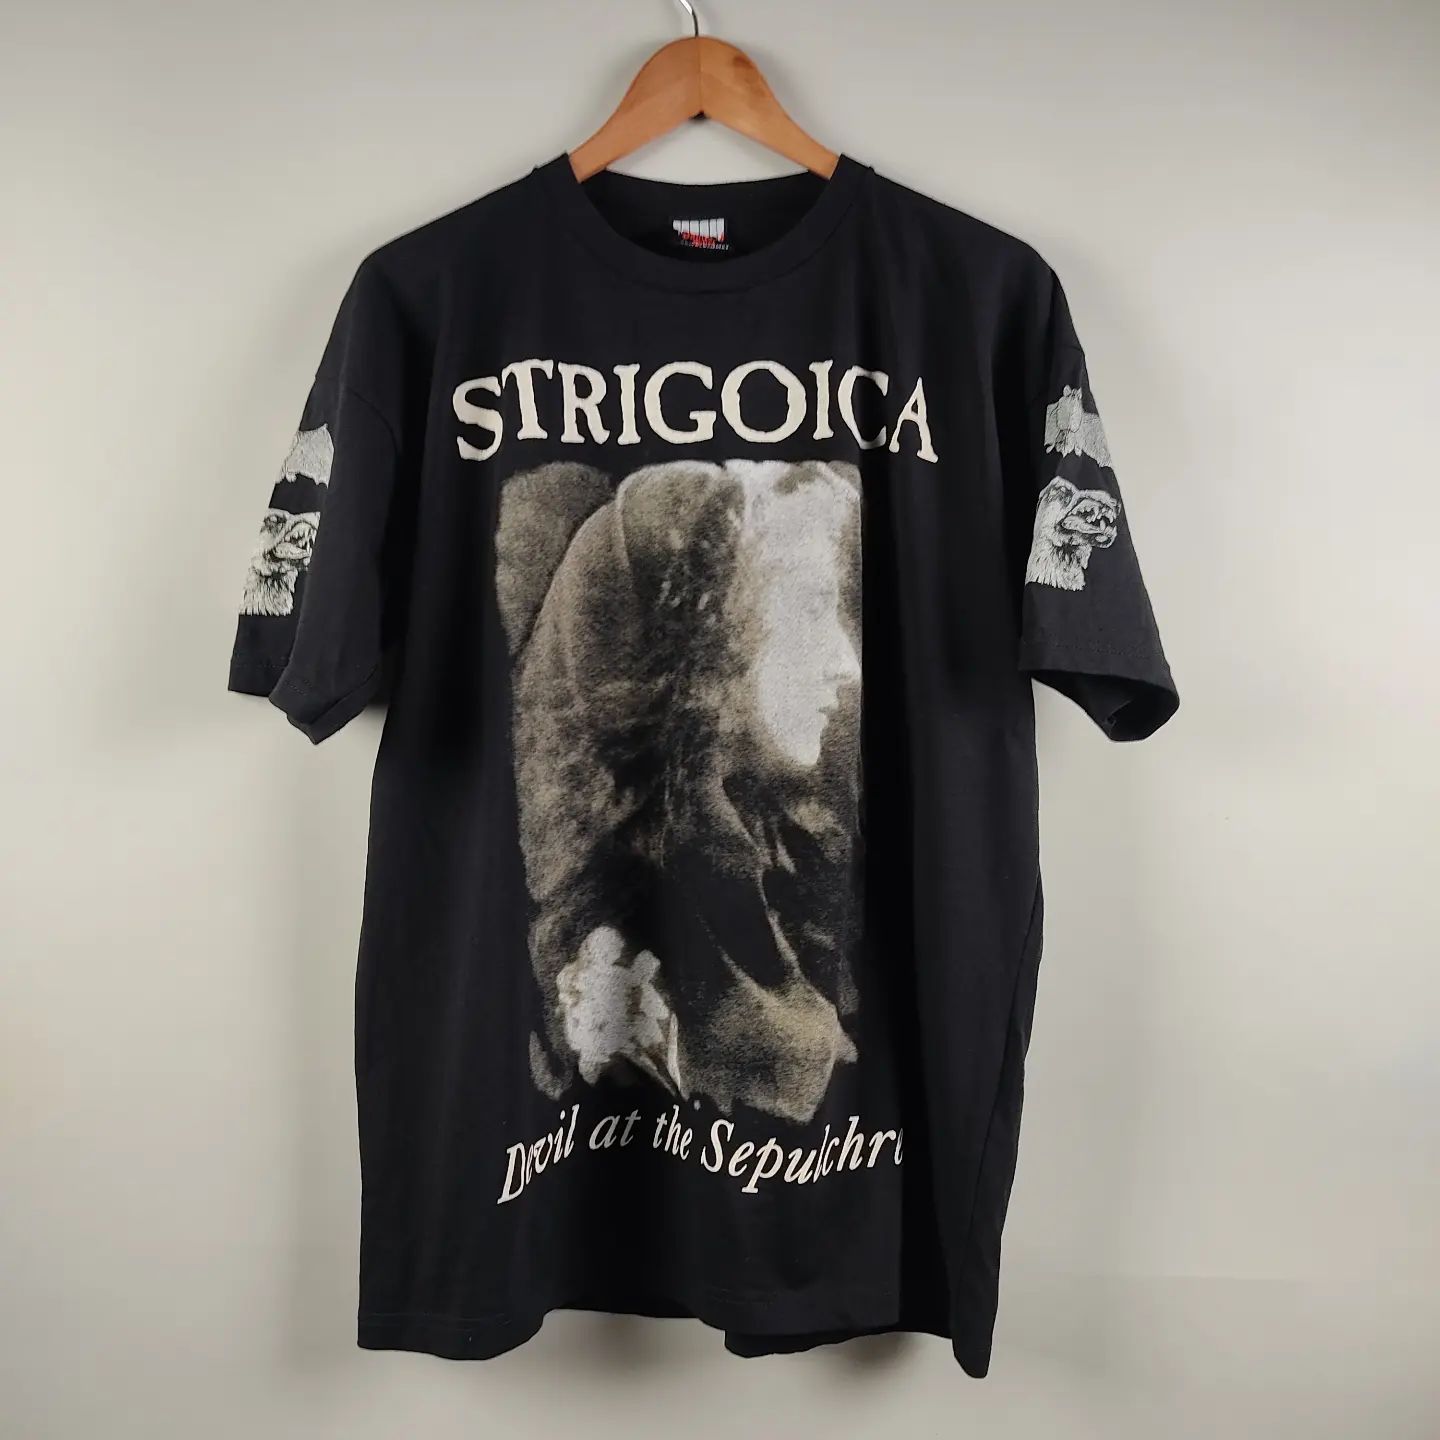 Pre-owned Band Tees X Rock Tees 1996 Cradle Of Filth 1/15 Strigoica Countess Dolingen In Black